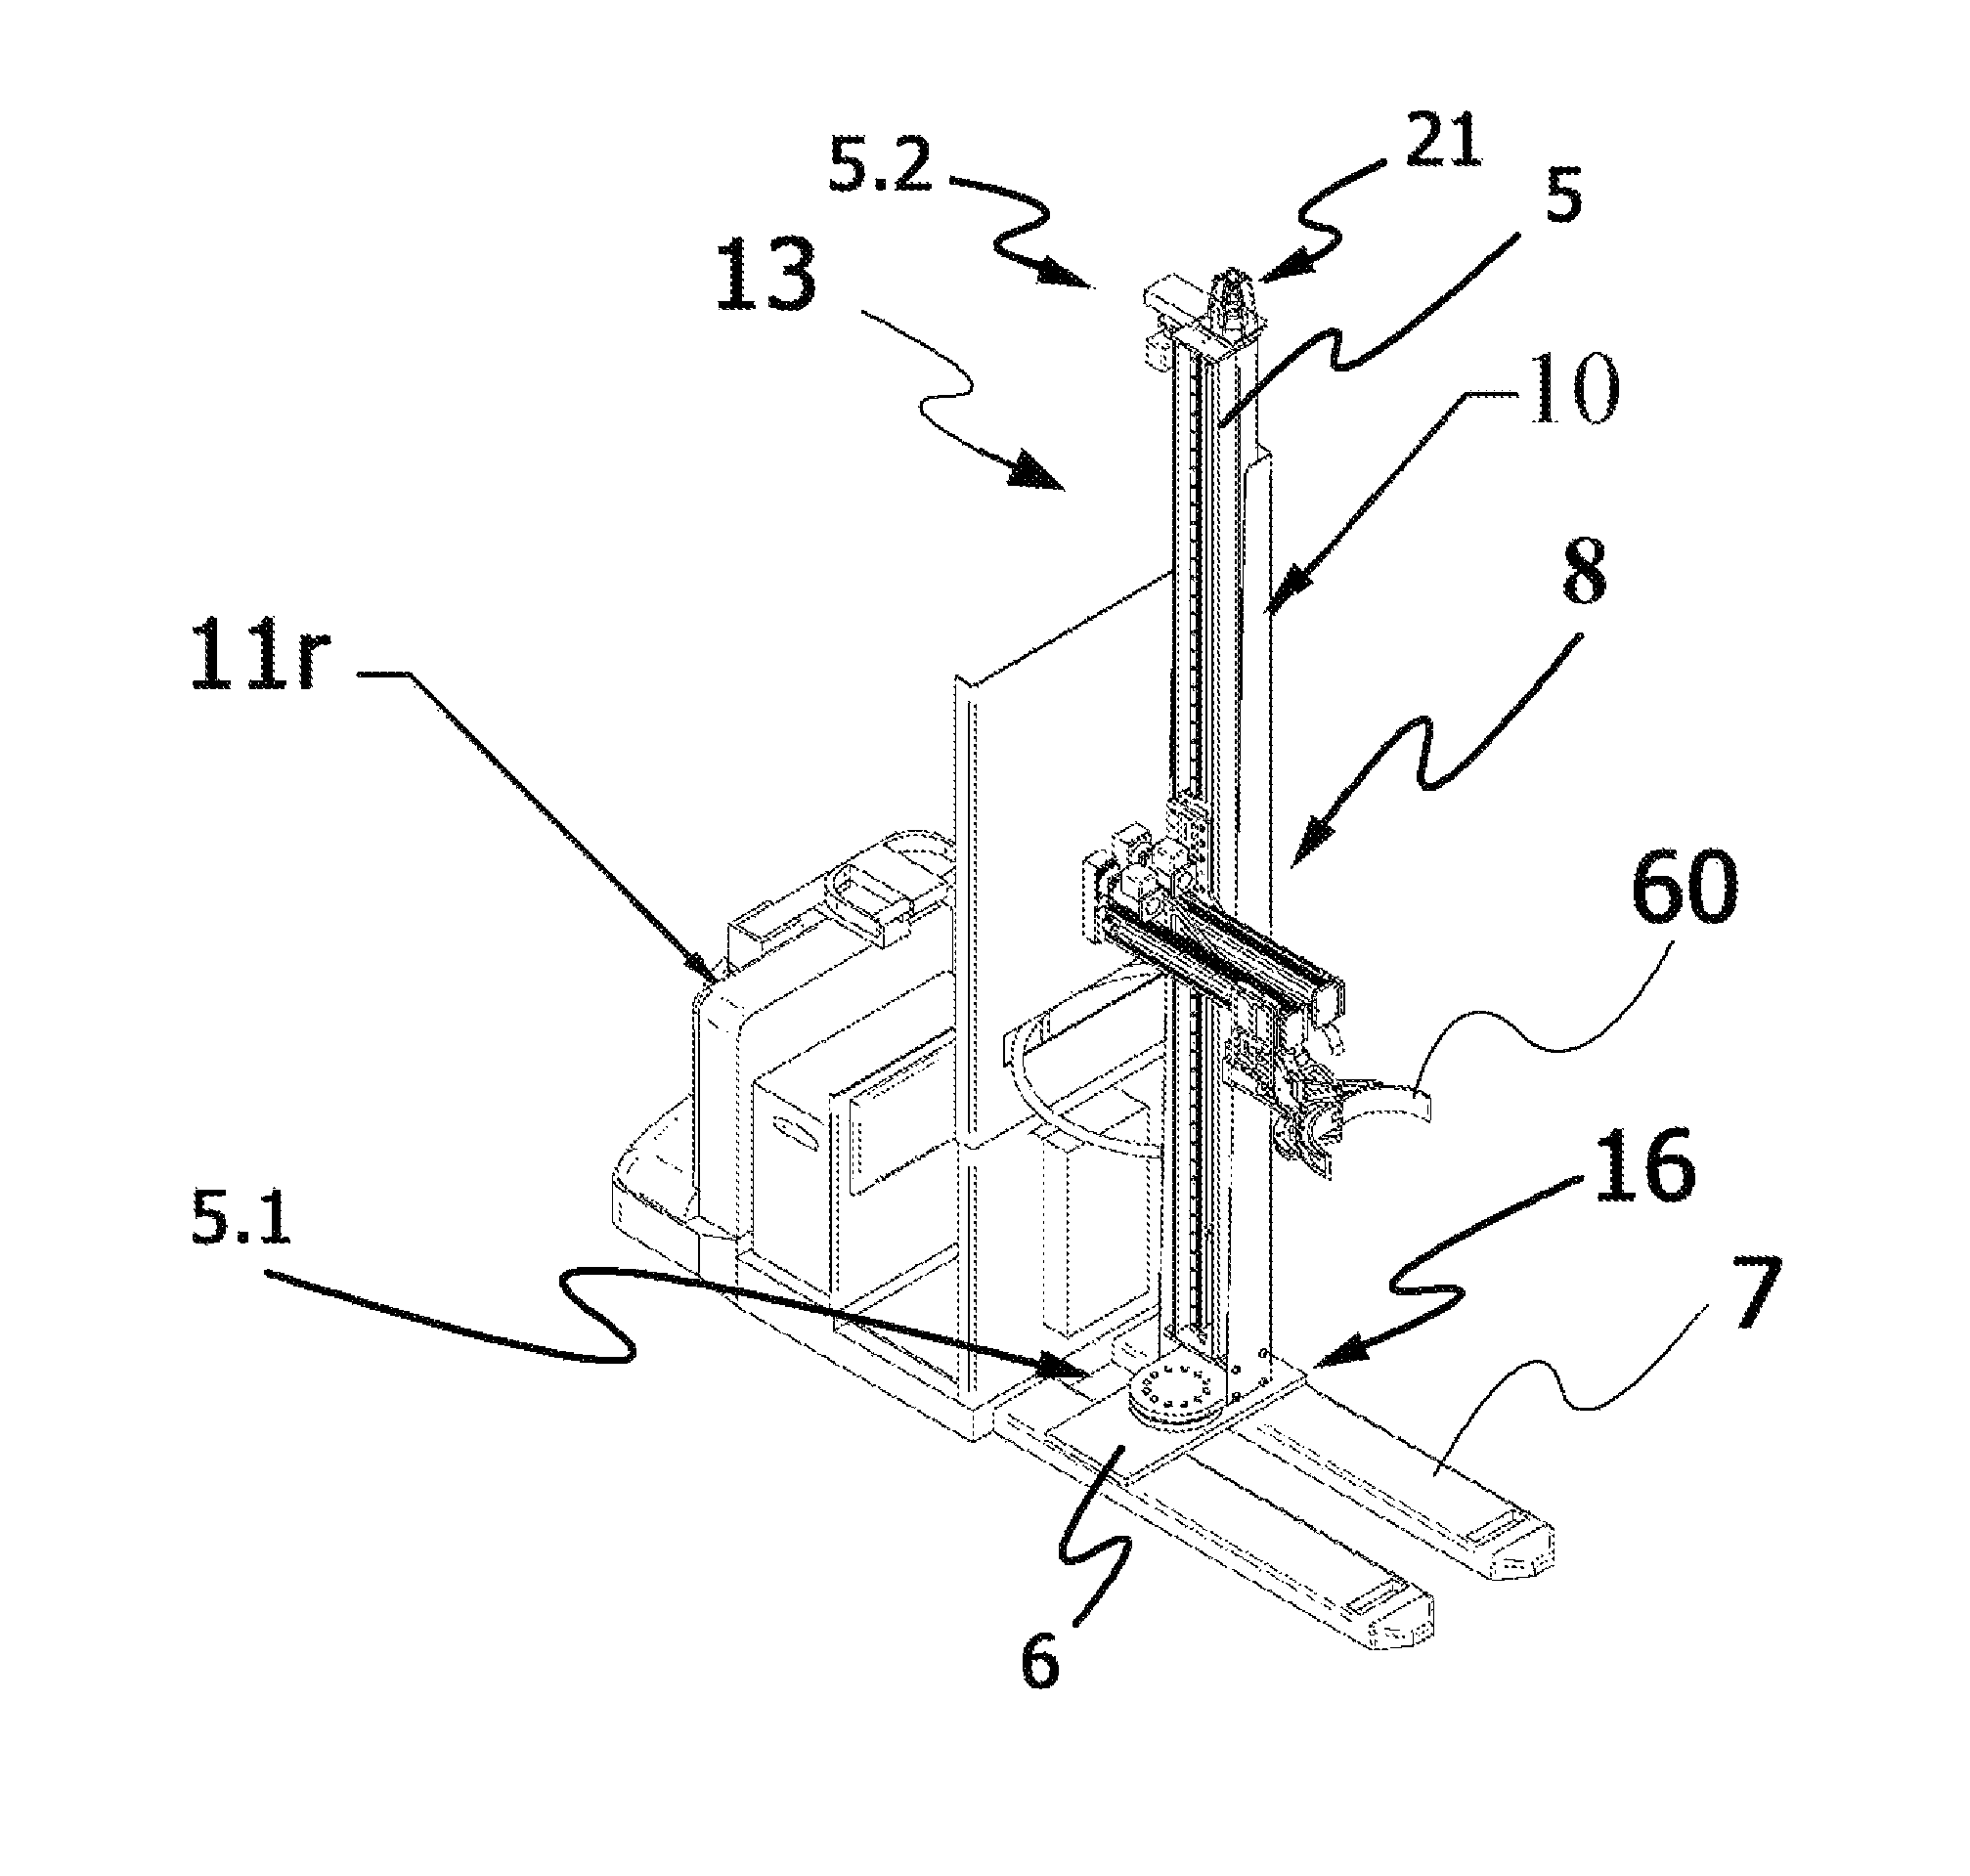 Portable transfer apparatus for moving items